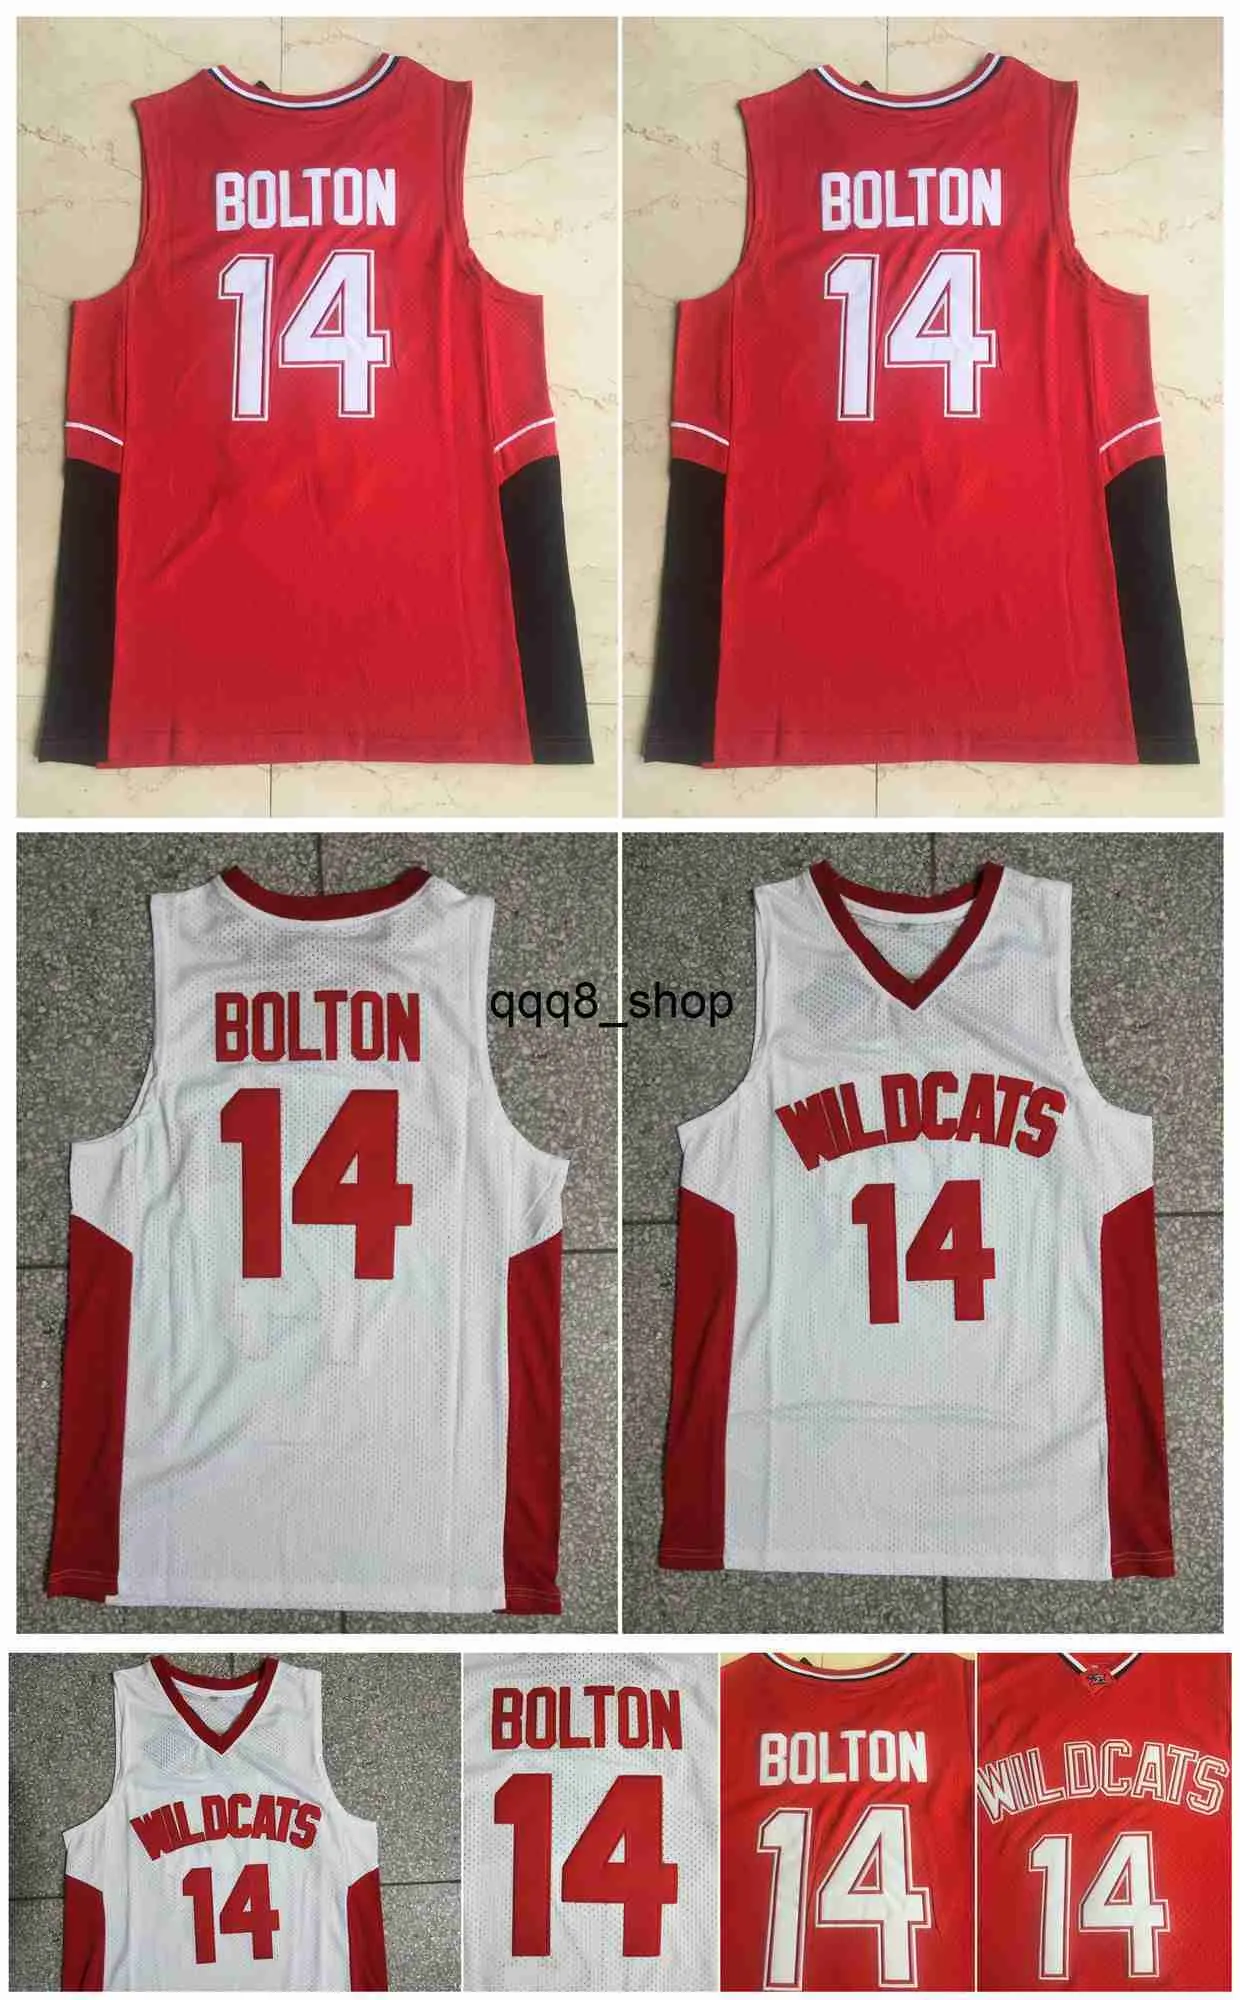 QQ8 Troy Bolton #14 High School Wildcats NCAA College Basketball Jerseys Crestwood High School Knights White Red Size S-XXL